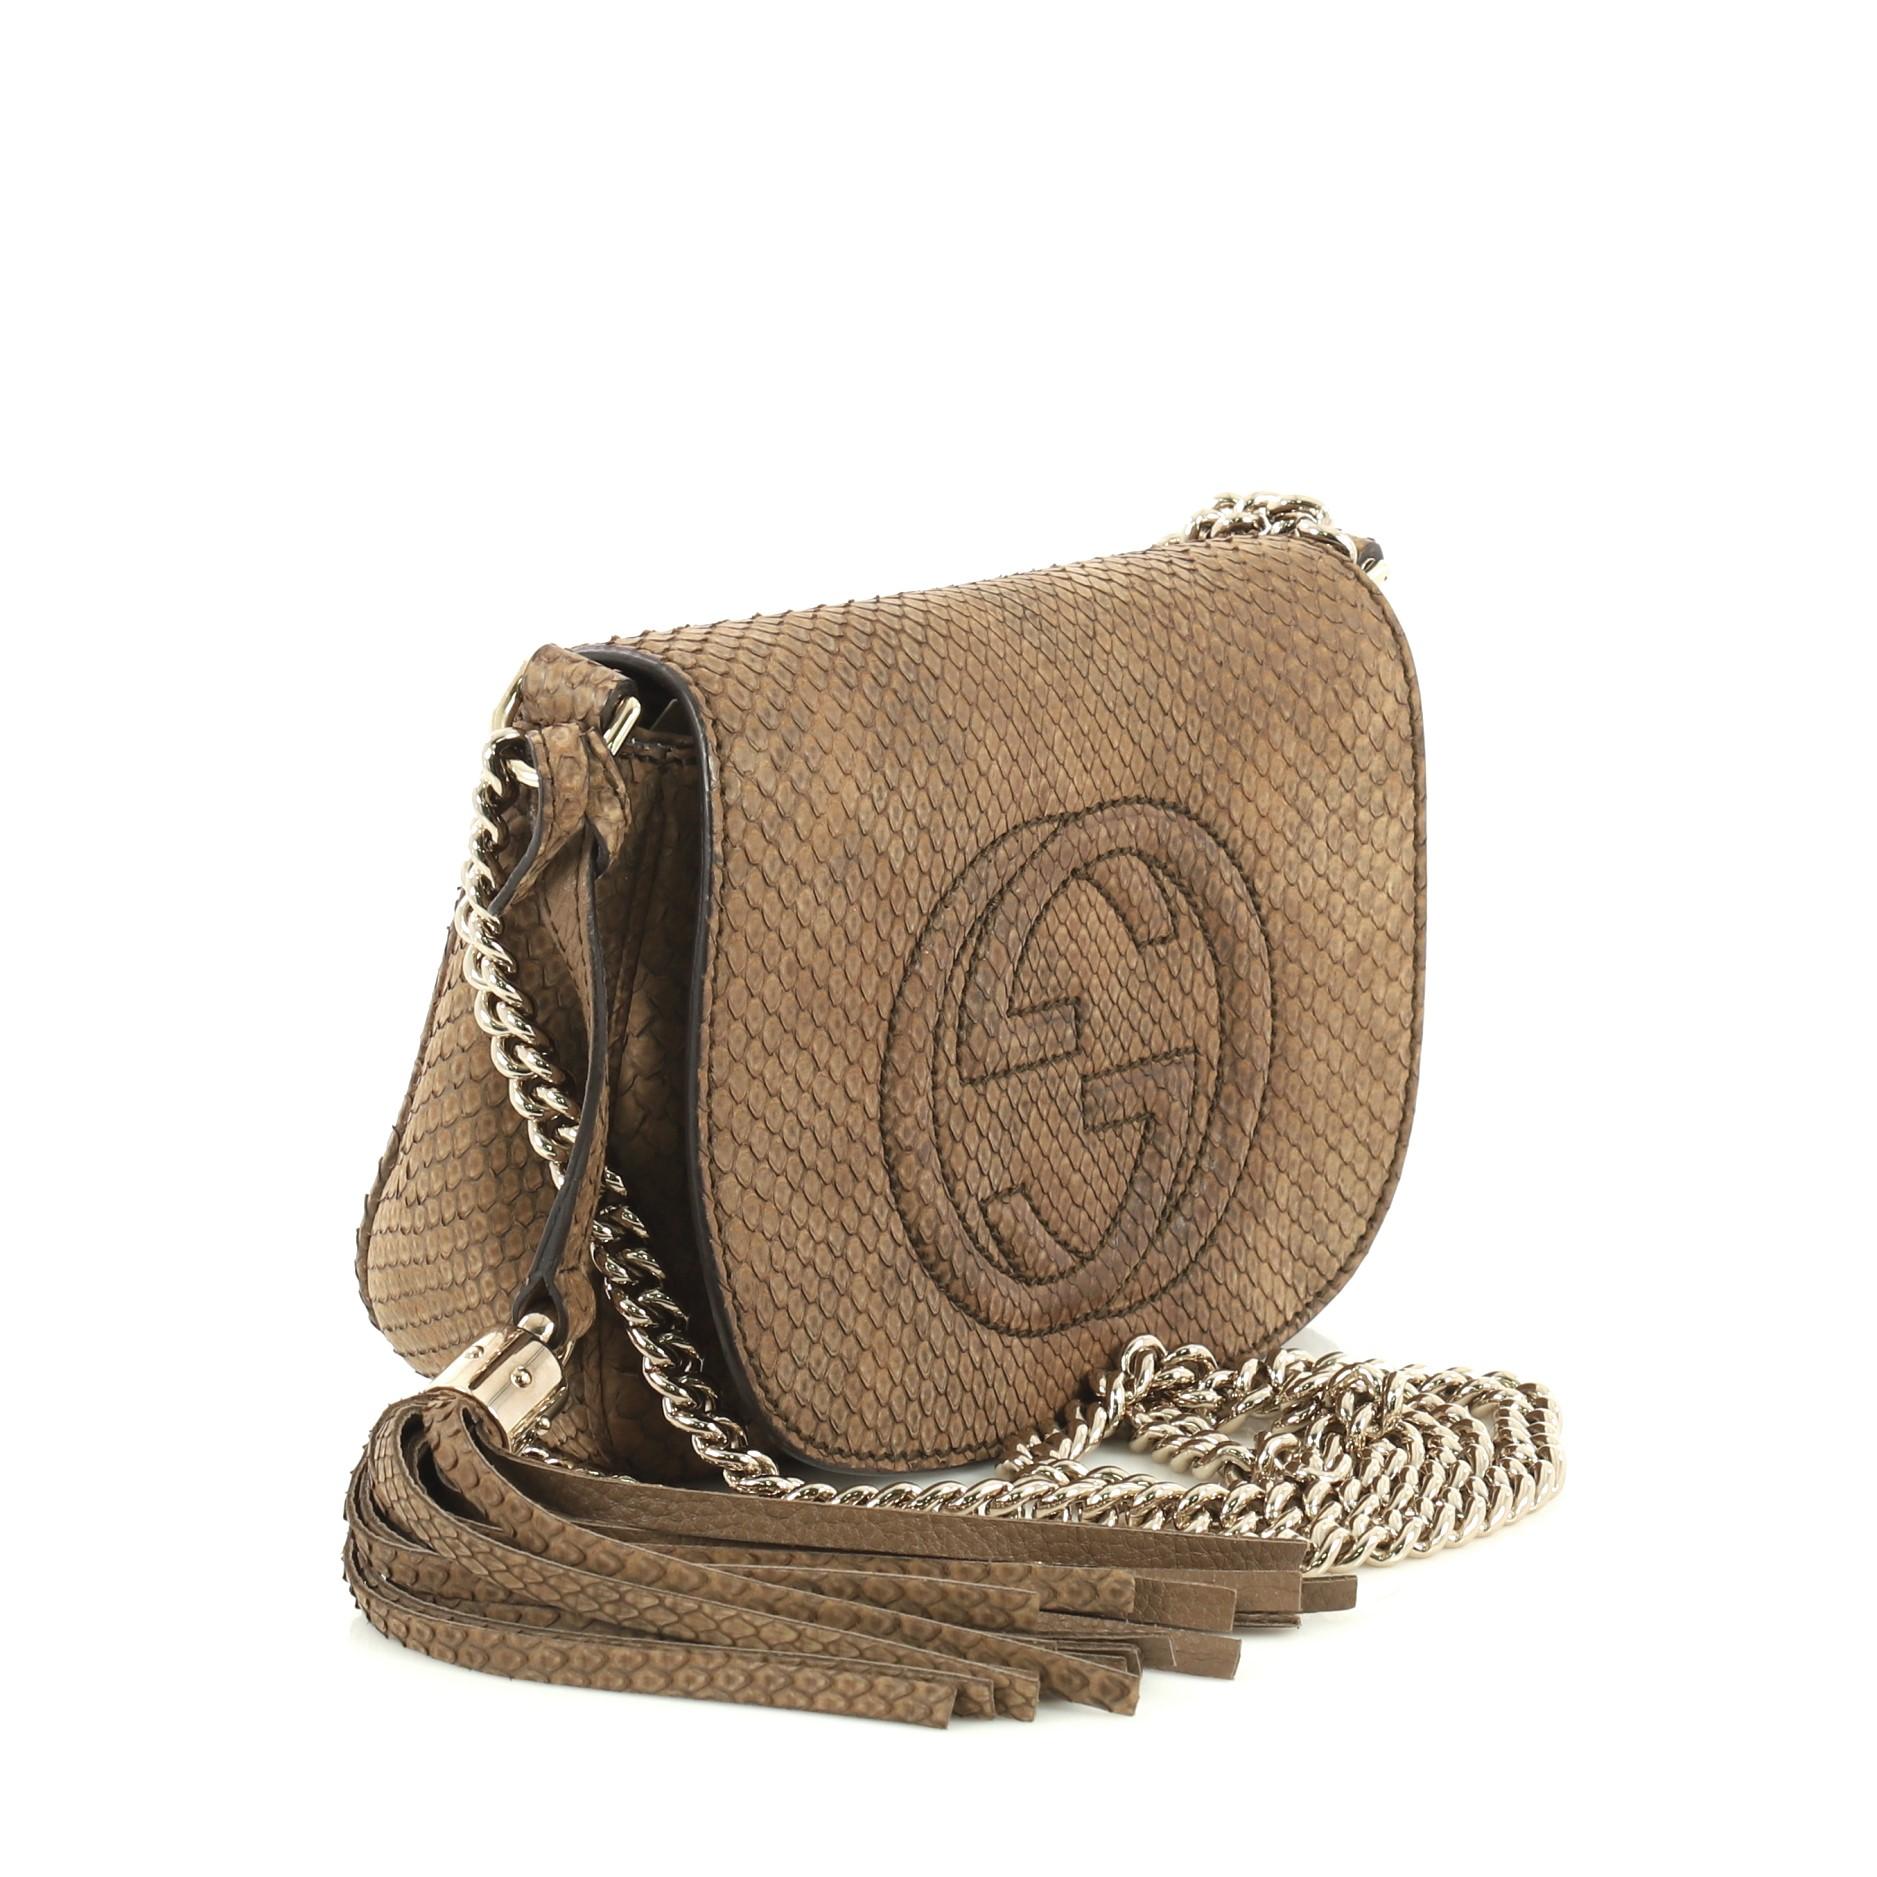 This Gucci Soho Chain Crossbody Bag Python Small, crafted from genuine brown python, features chain link strap, tassel accent, stitched interlocking GG logo, and gold-tone hardware. Its hidden magnetic snap closure opens to a neutral fabric interior